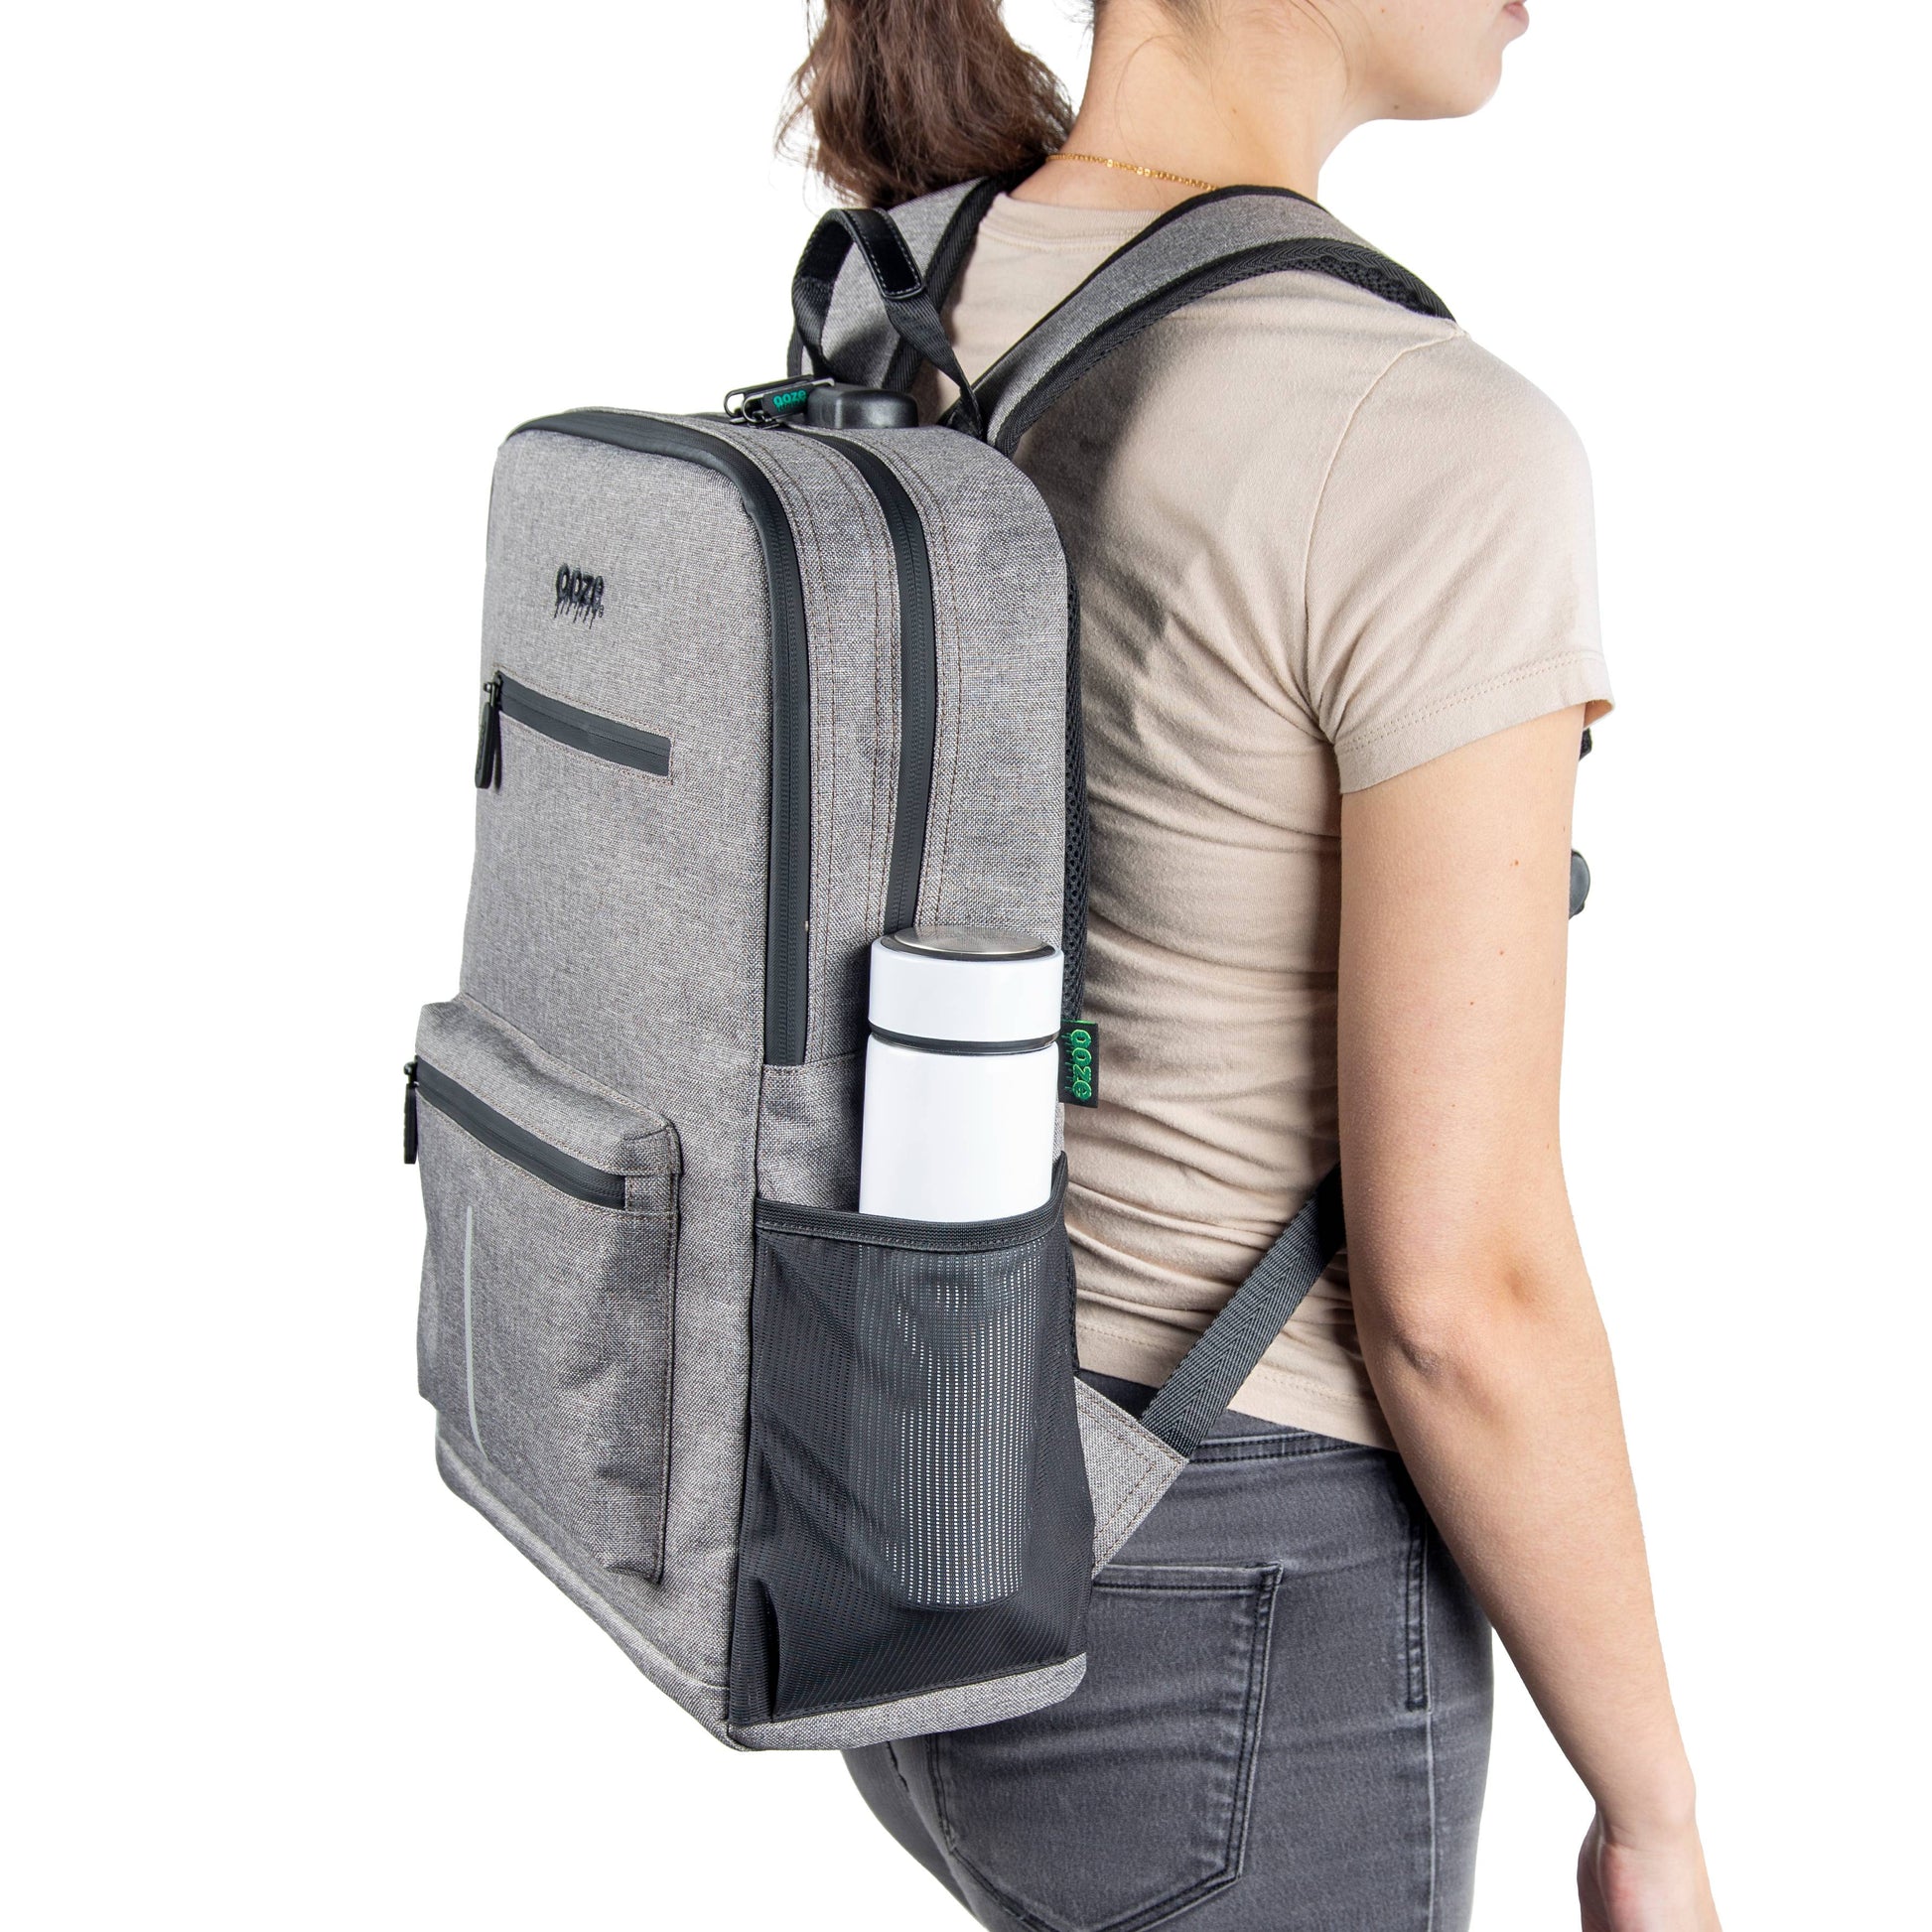 A girl is wearing the gray Ooze backpack with a white water bottle in the side pocket